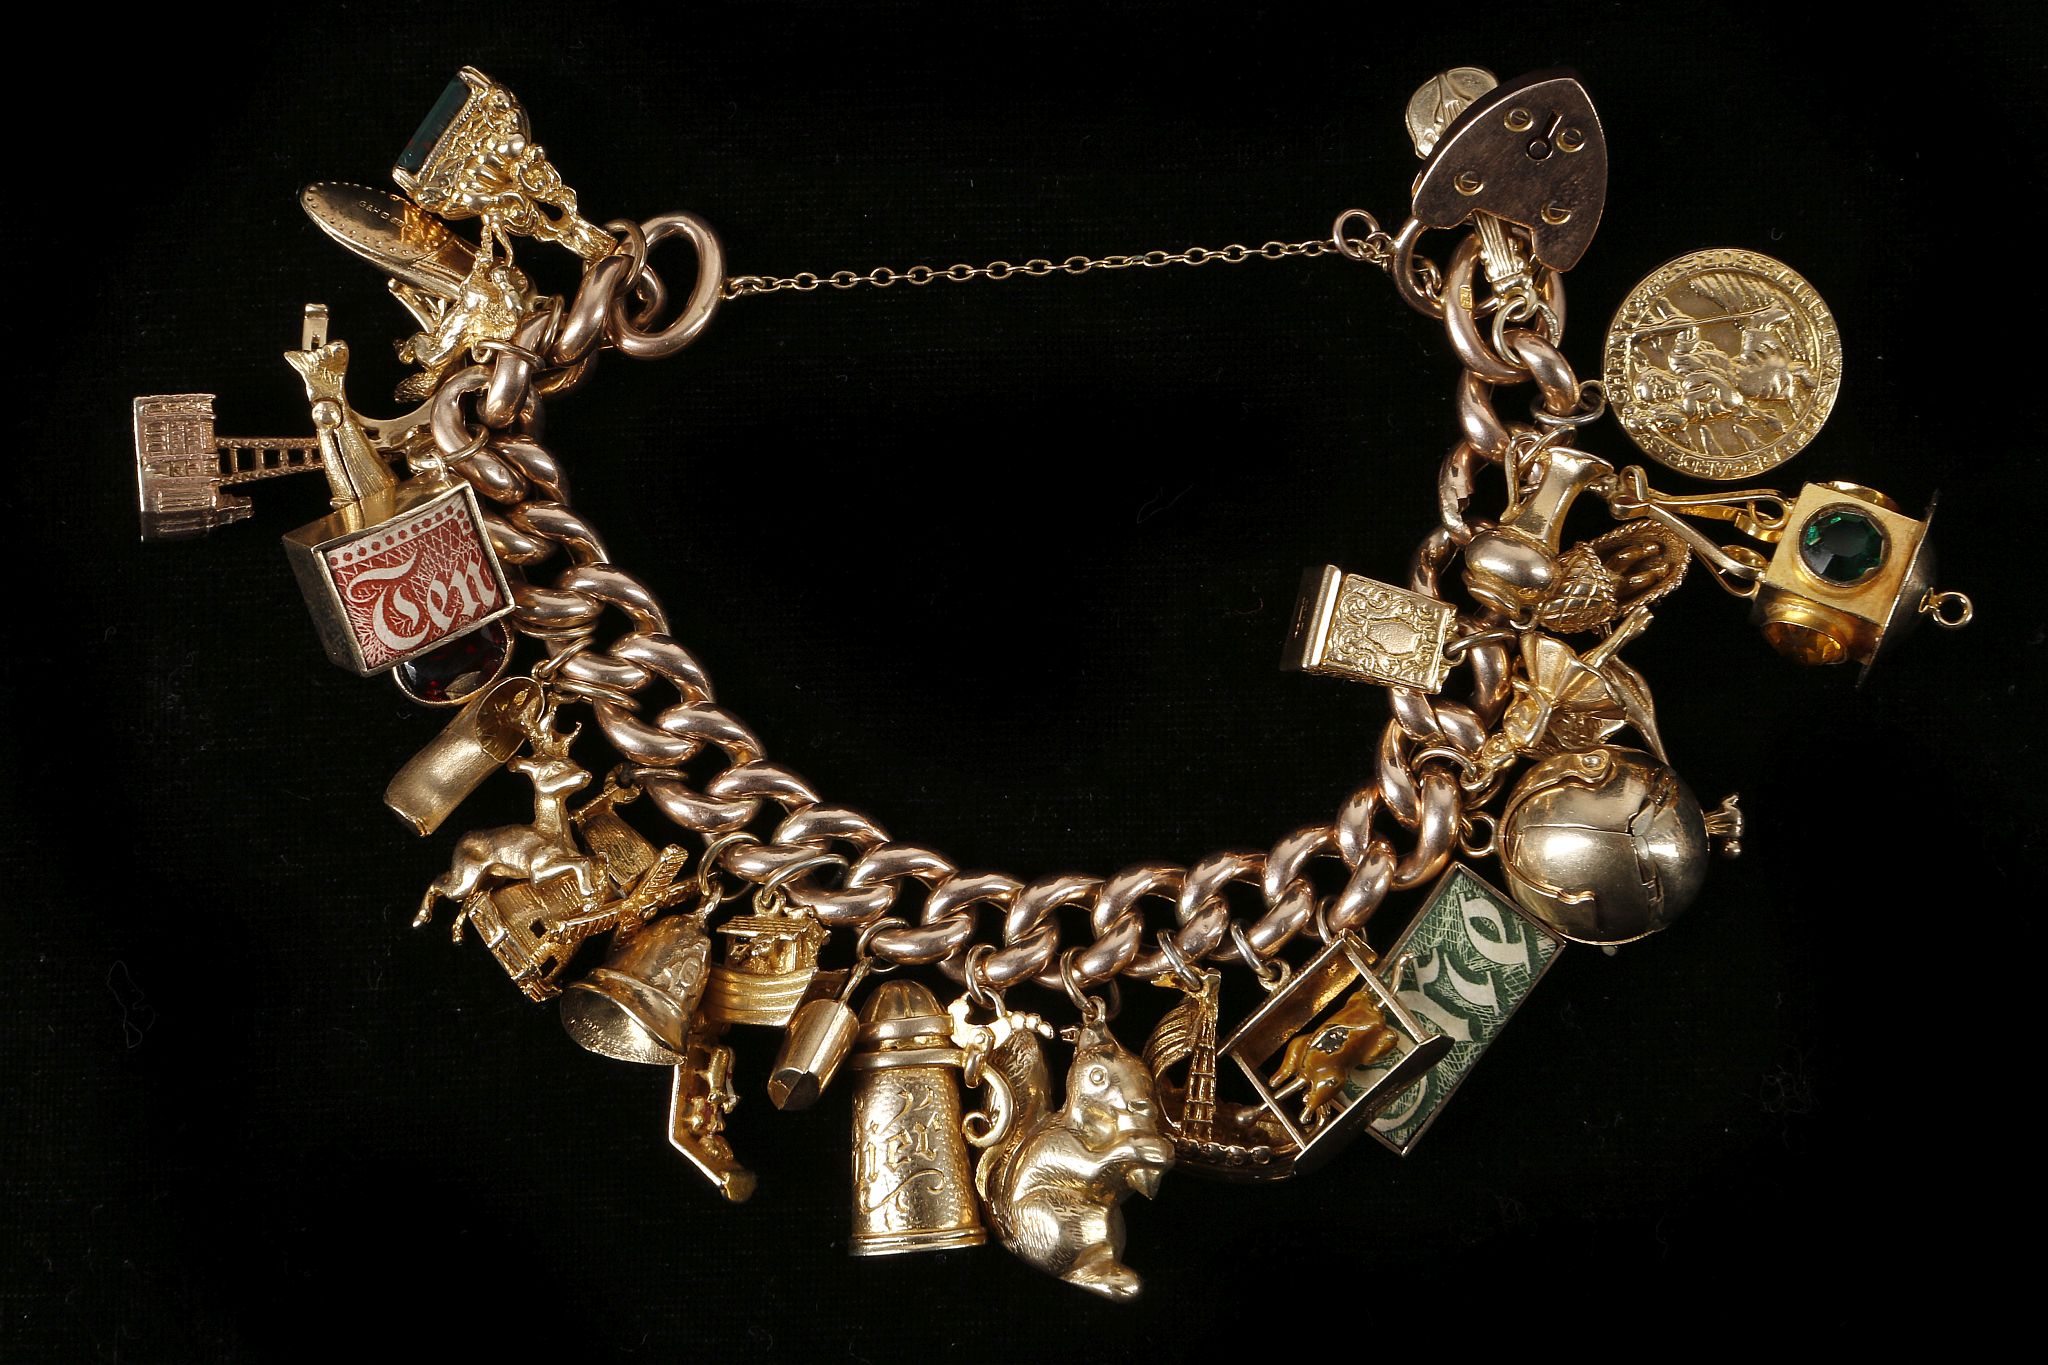 A 9ct rose gold, 29 piece charm bracelet with all - Image 2 of 2